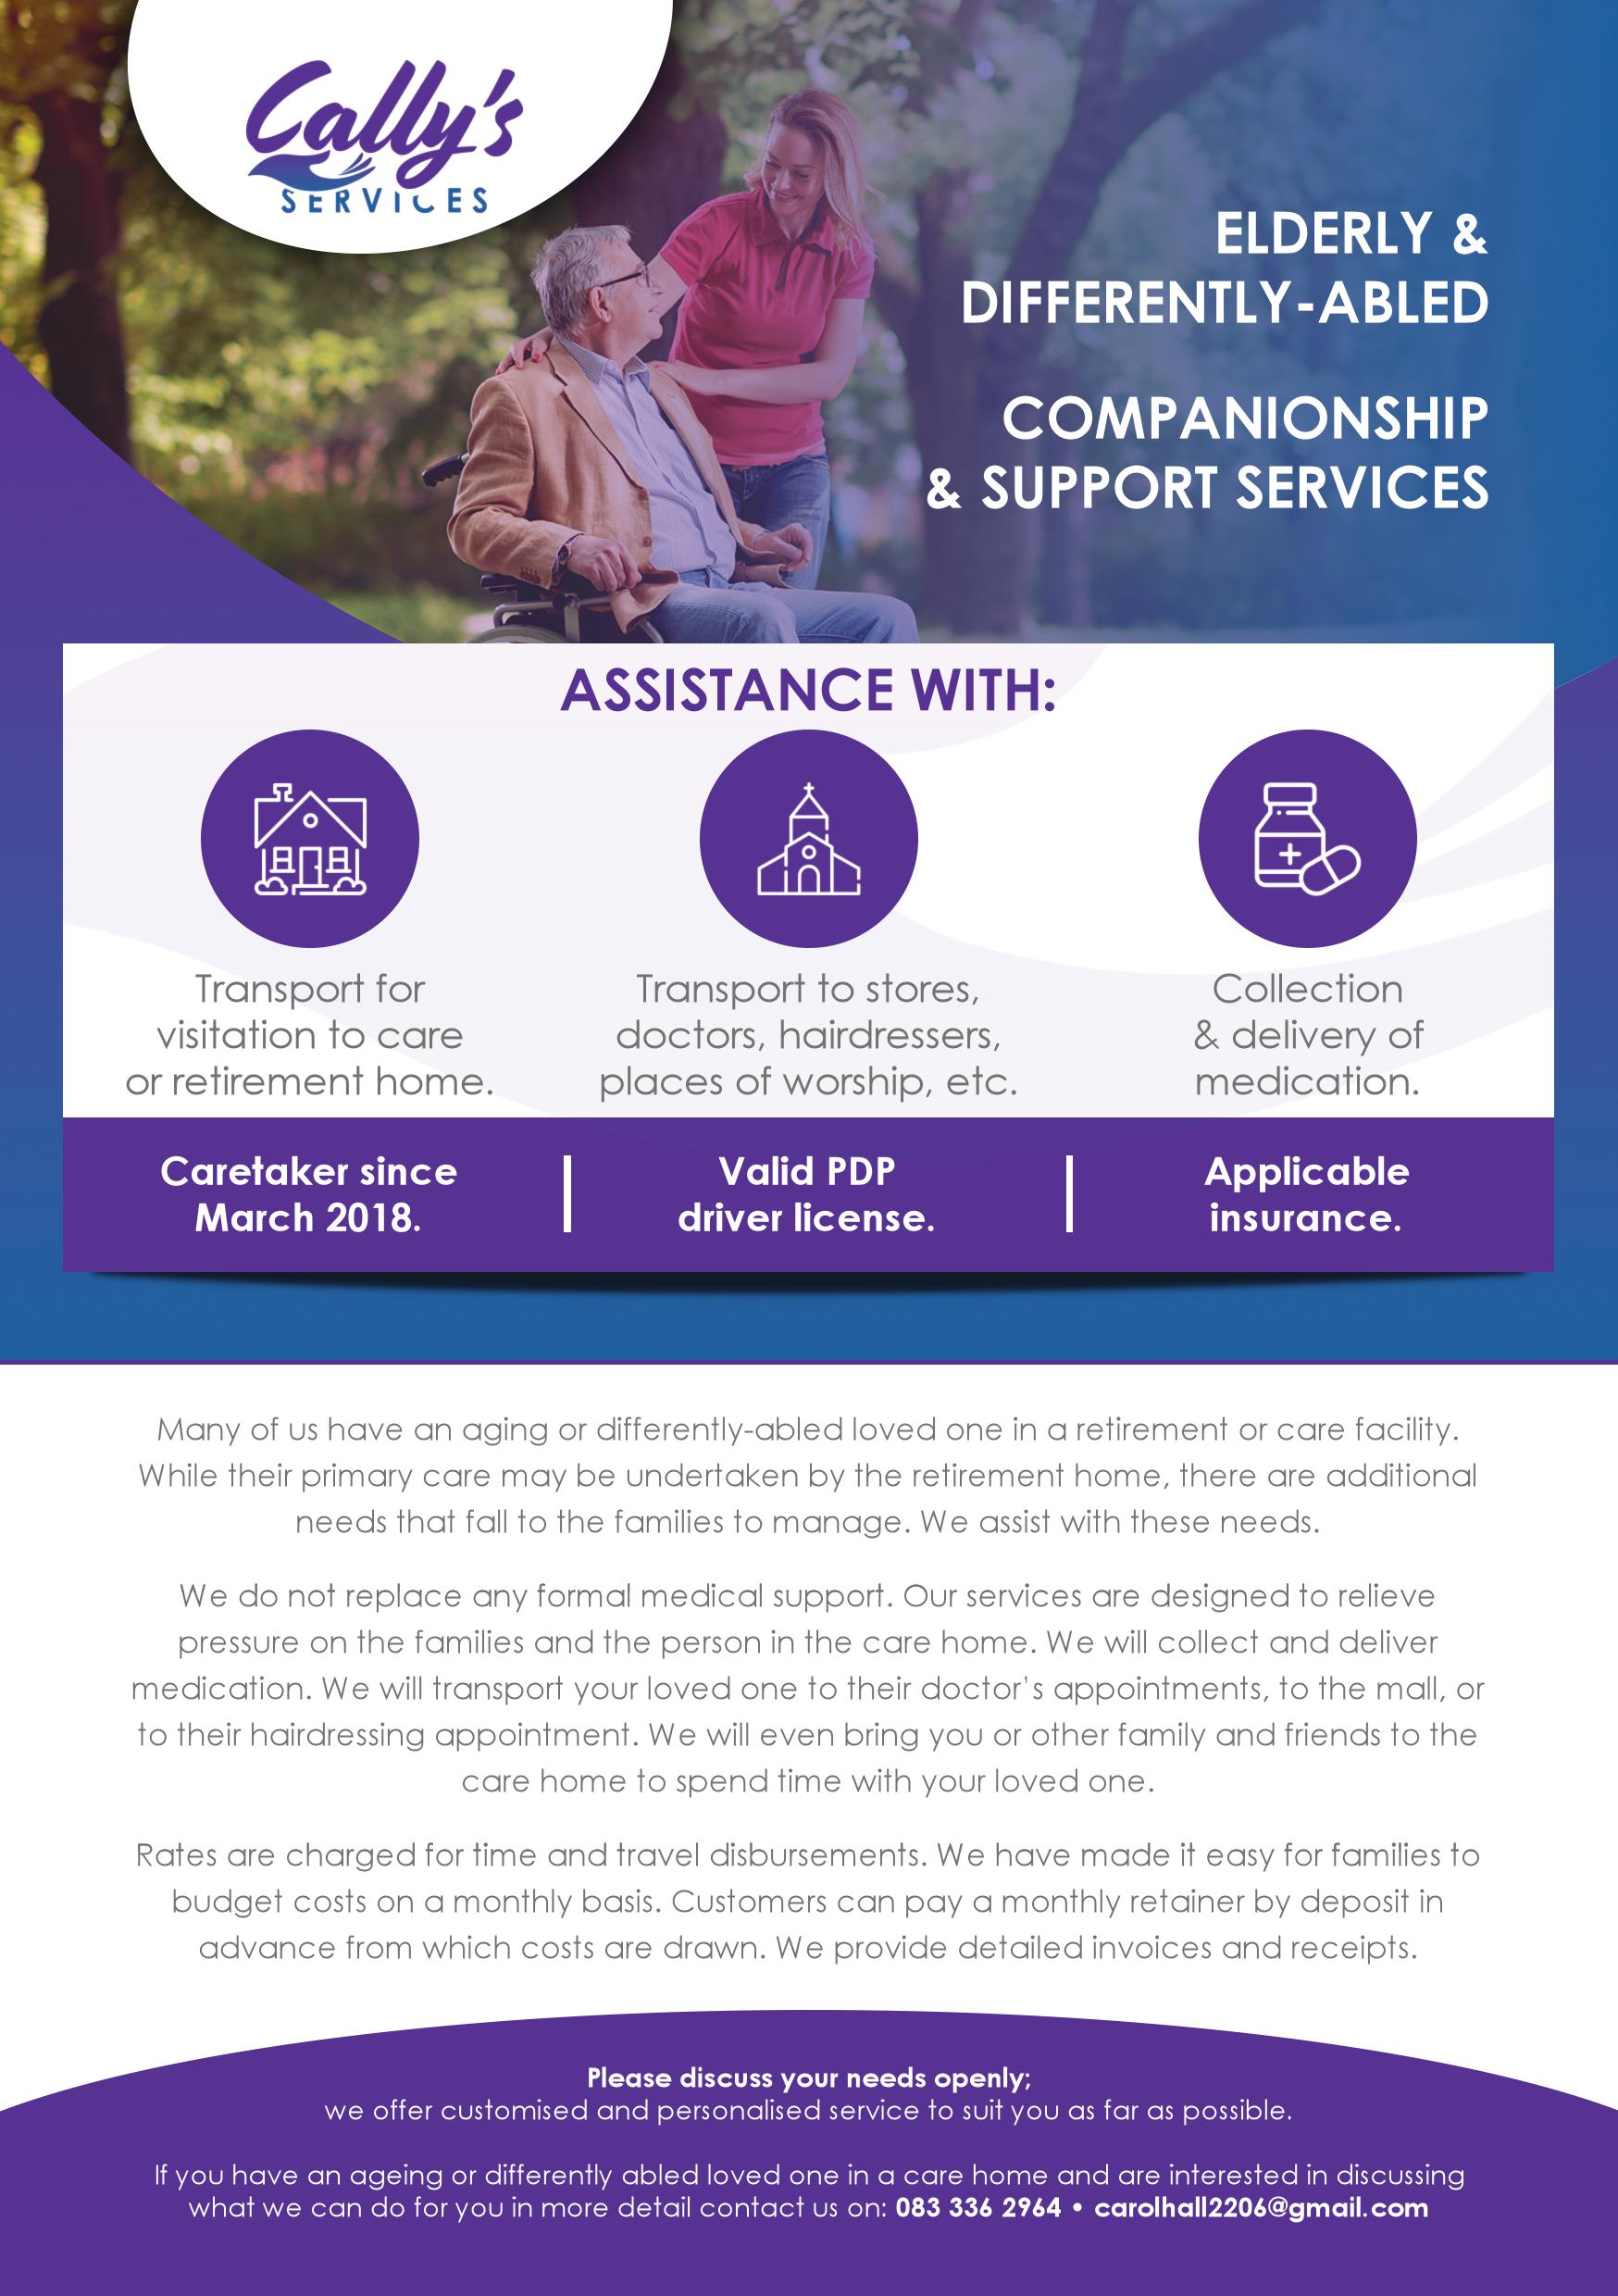 Assistance with companionship and support to the elderly, differently abled and working parents with children.Quoted rate above is subject to individual requirements. .  Contact Carol Ann Hall on 0833362964 for a once off free appointment to discuss your loved one's needs. 